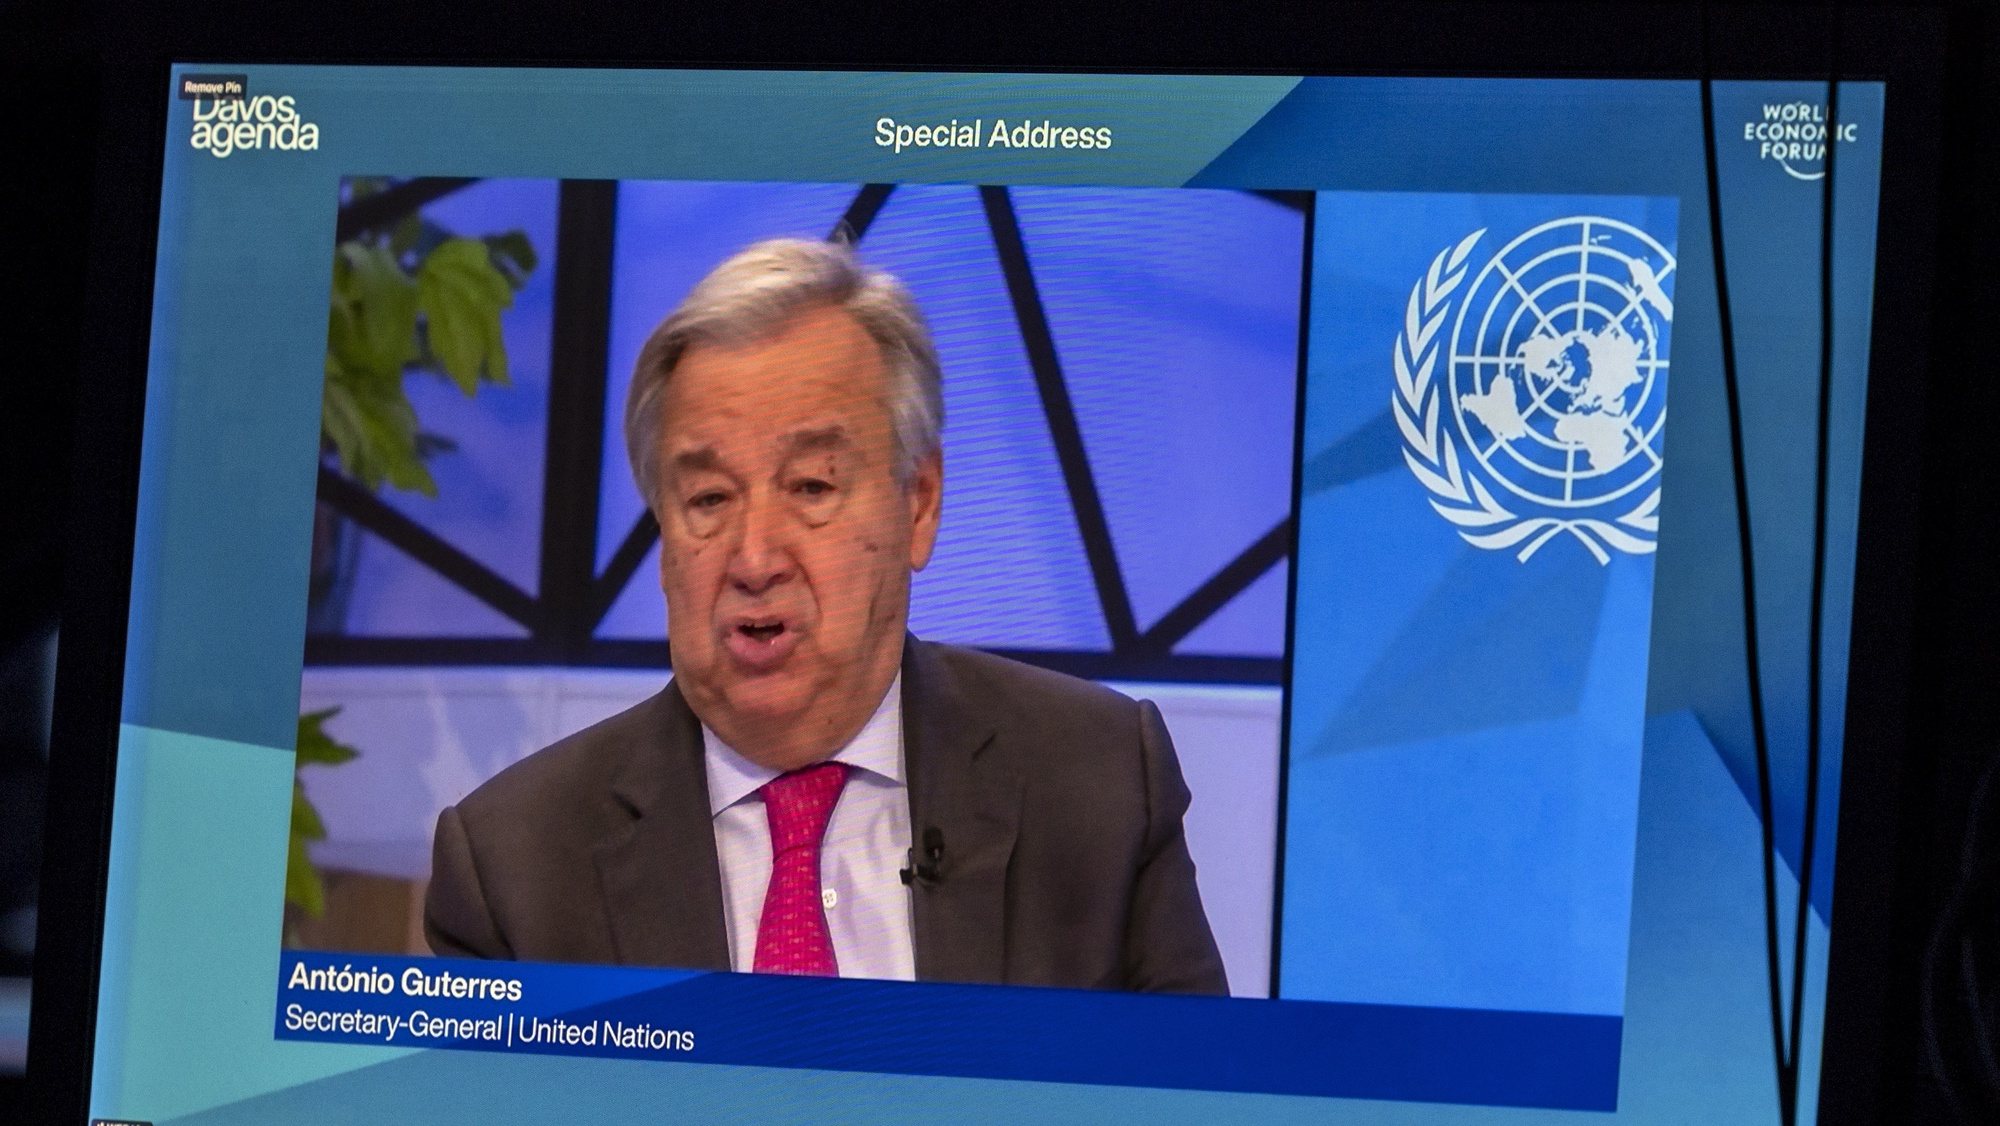 epa09691511 A screen shows the U.N. Secretary-General Antonio Guterres delivering his statement during the Davos Agenda 2022, in Cologny near Geneva, Switzerland, 17 January 2022. The Davos Agenda 2022 will be hosted virtually due to the Coronavirus pandemic. Global leaders will gather through a series of virtual plenaries to shape the principles, policies and partnerships needed in this challenging context.  EPA/SALVATORE DI NOLFI